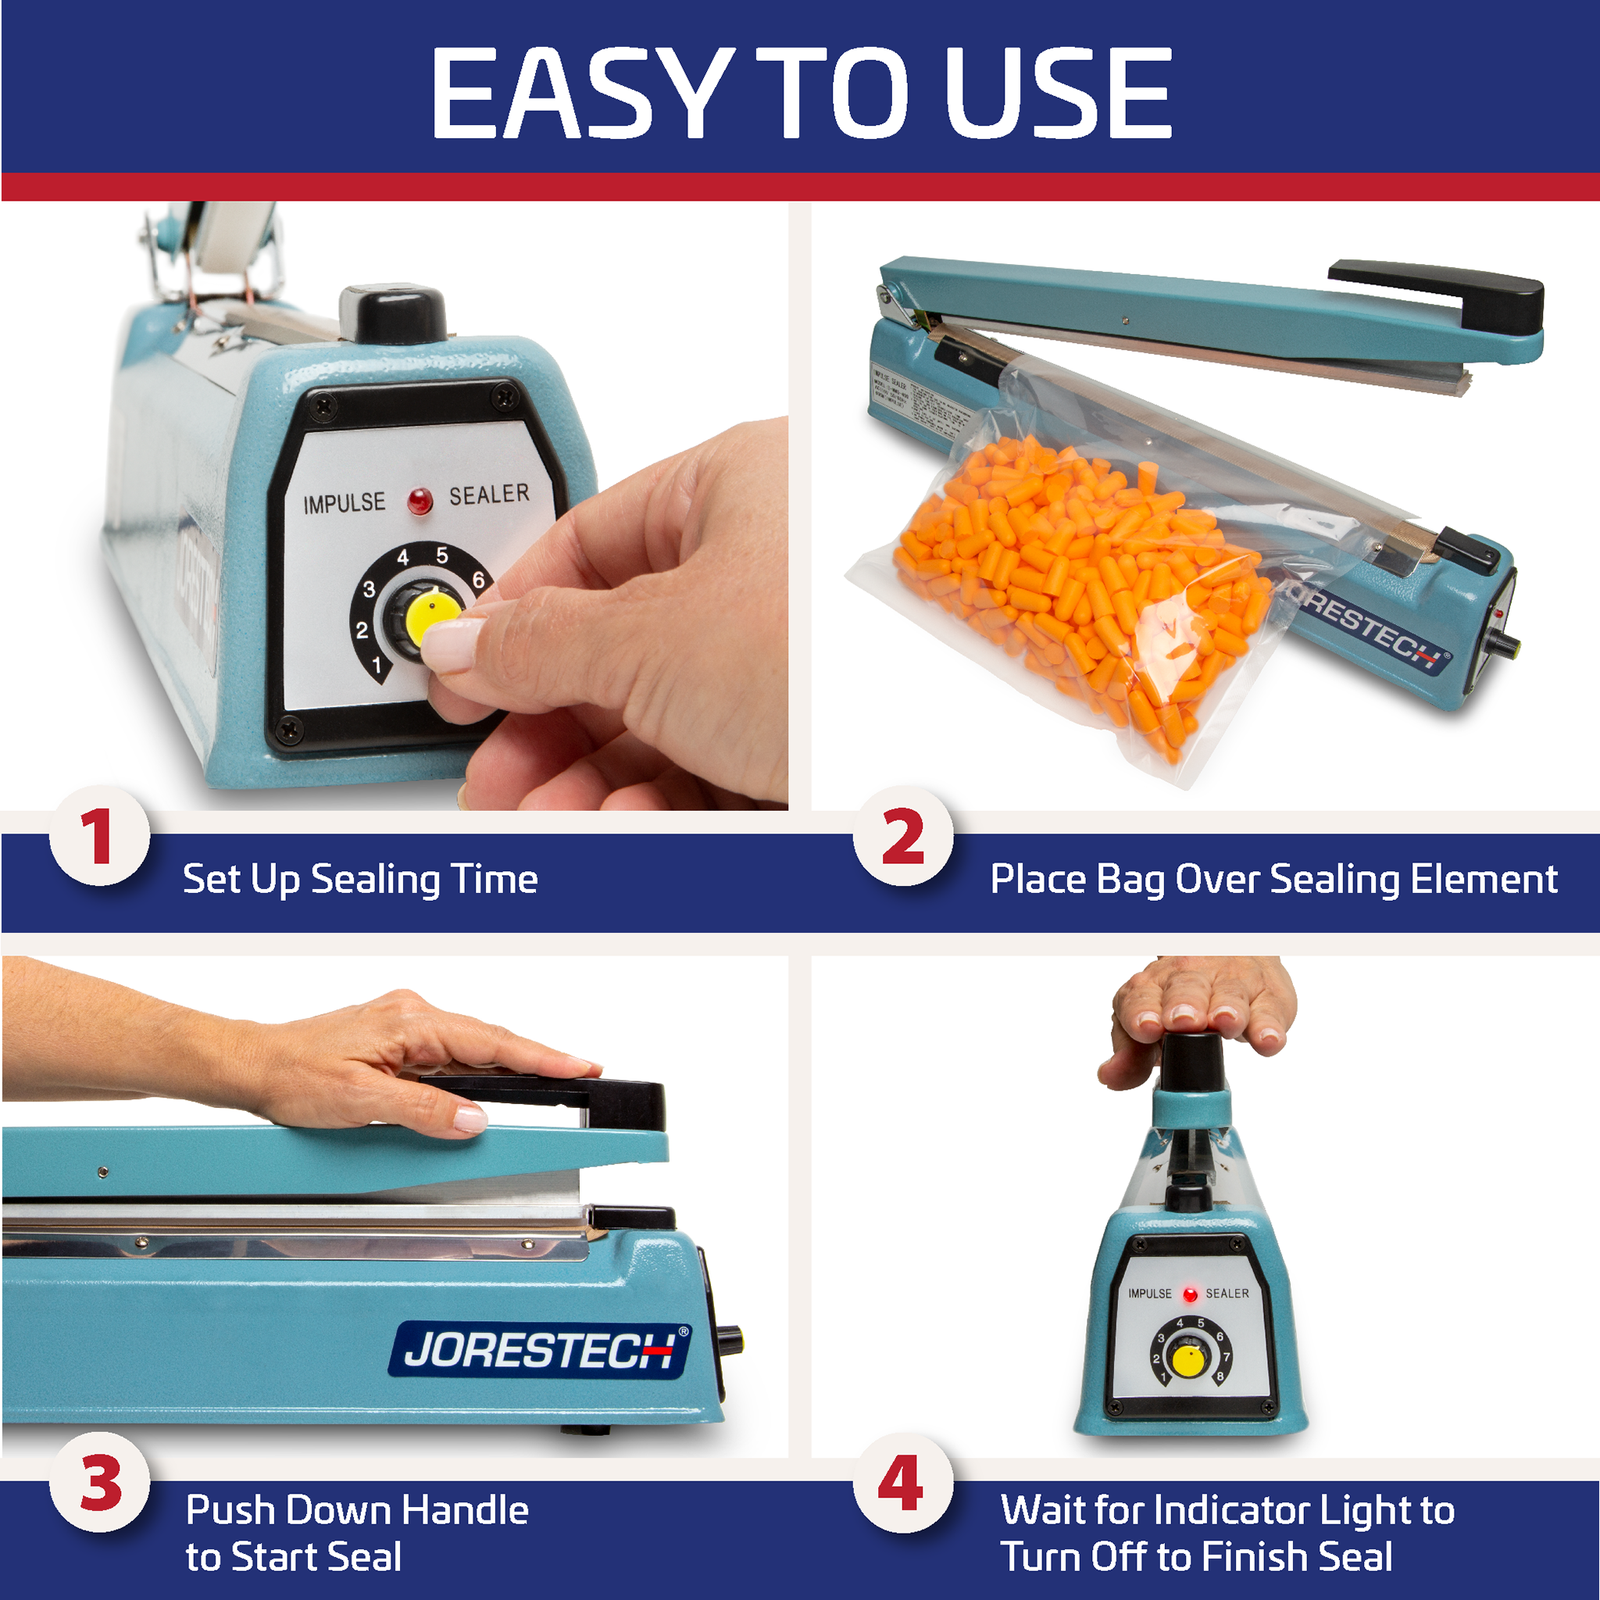 Steps of how to seal a bag with a manual impulse bag sealer